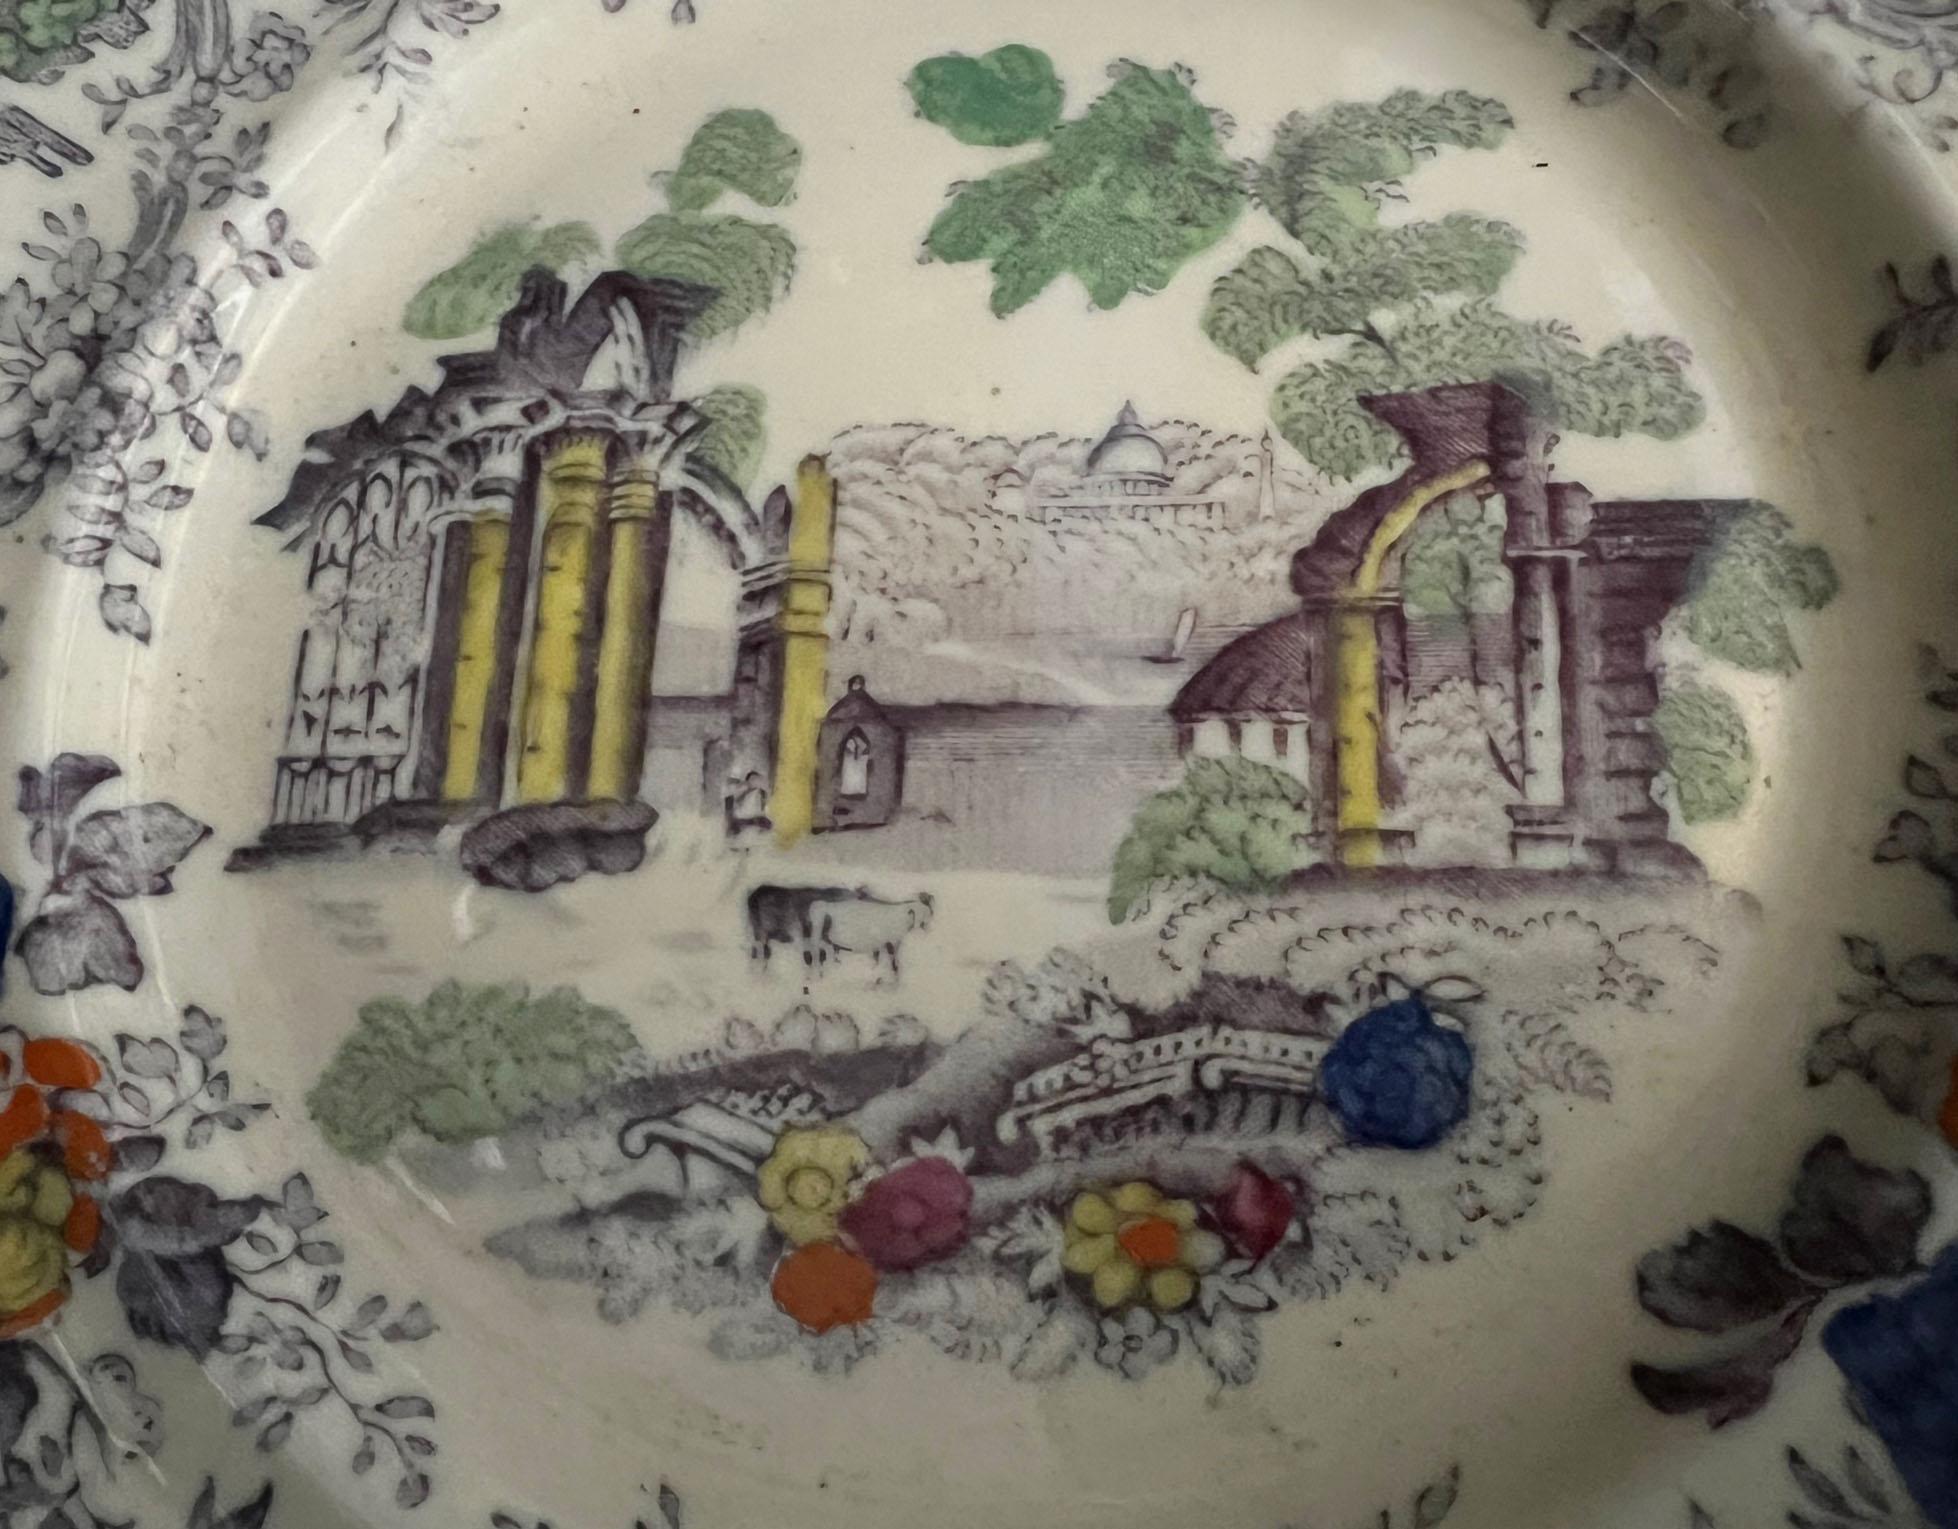 A beautifully hand painted Edwardian era Mason's Ironstone plate with columns and florals. England, circa 1900s.